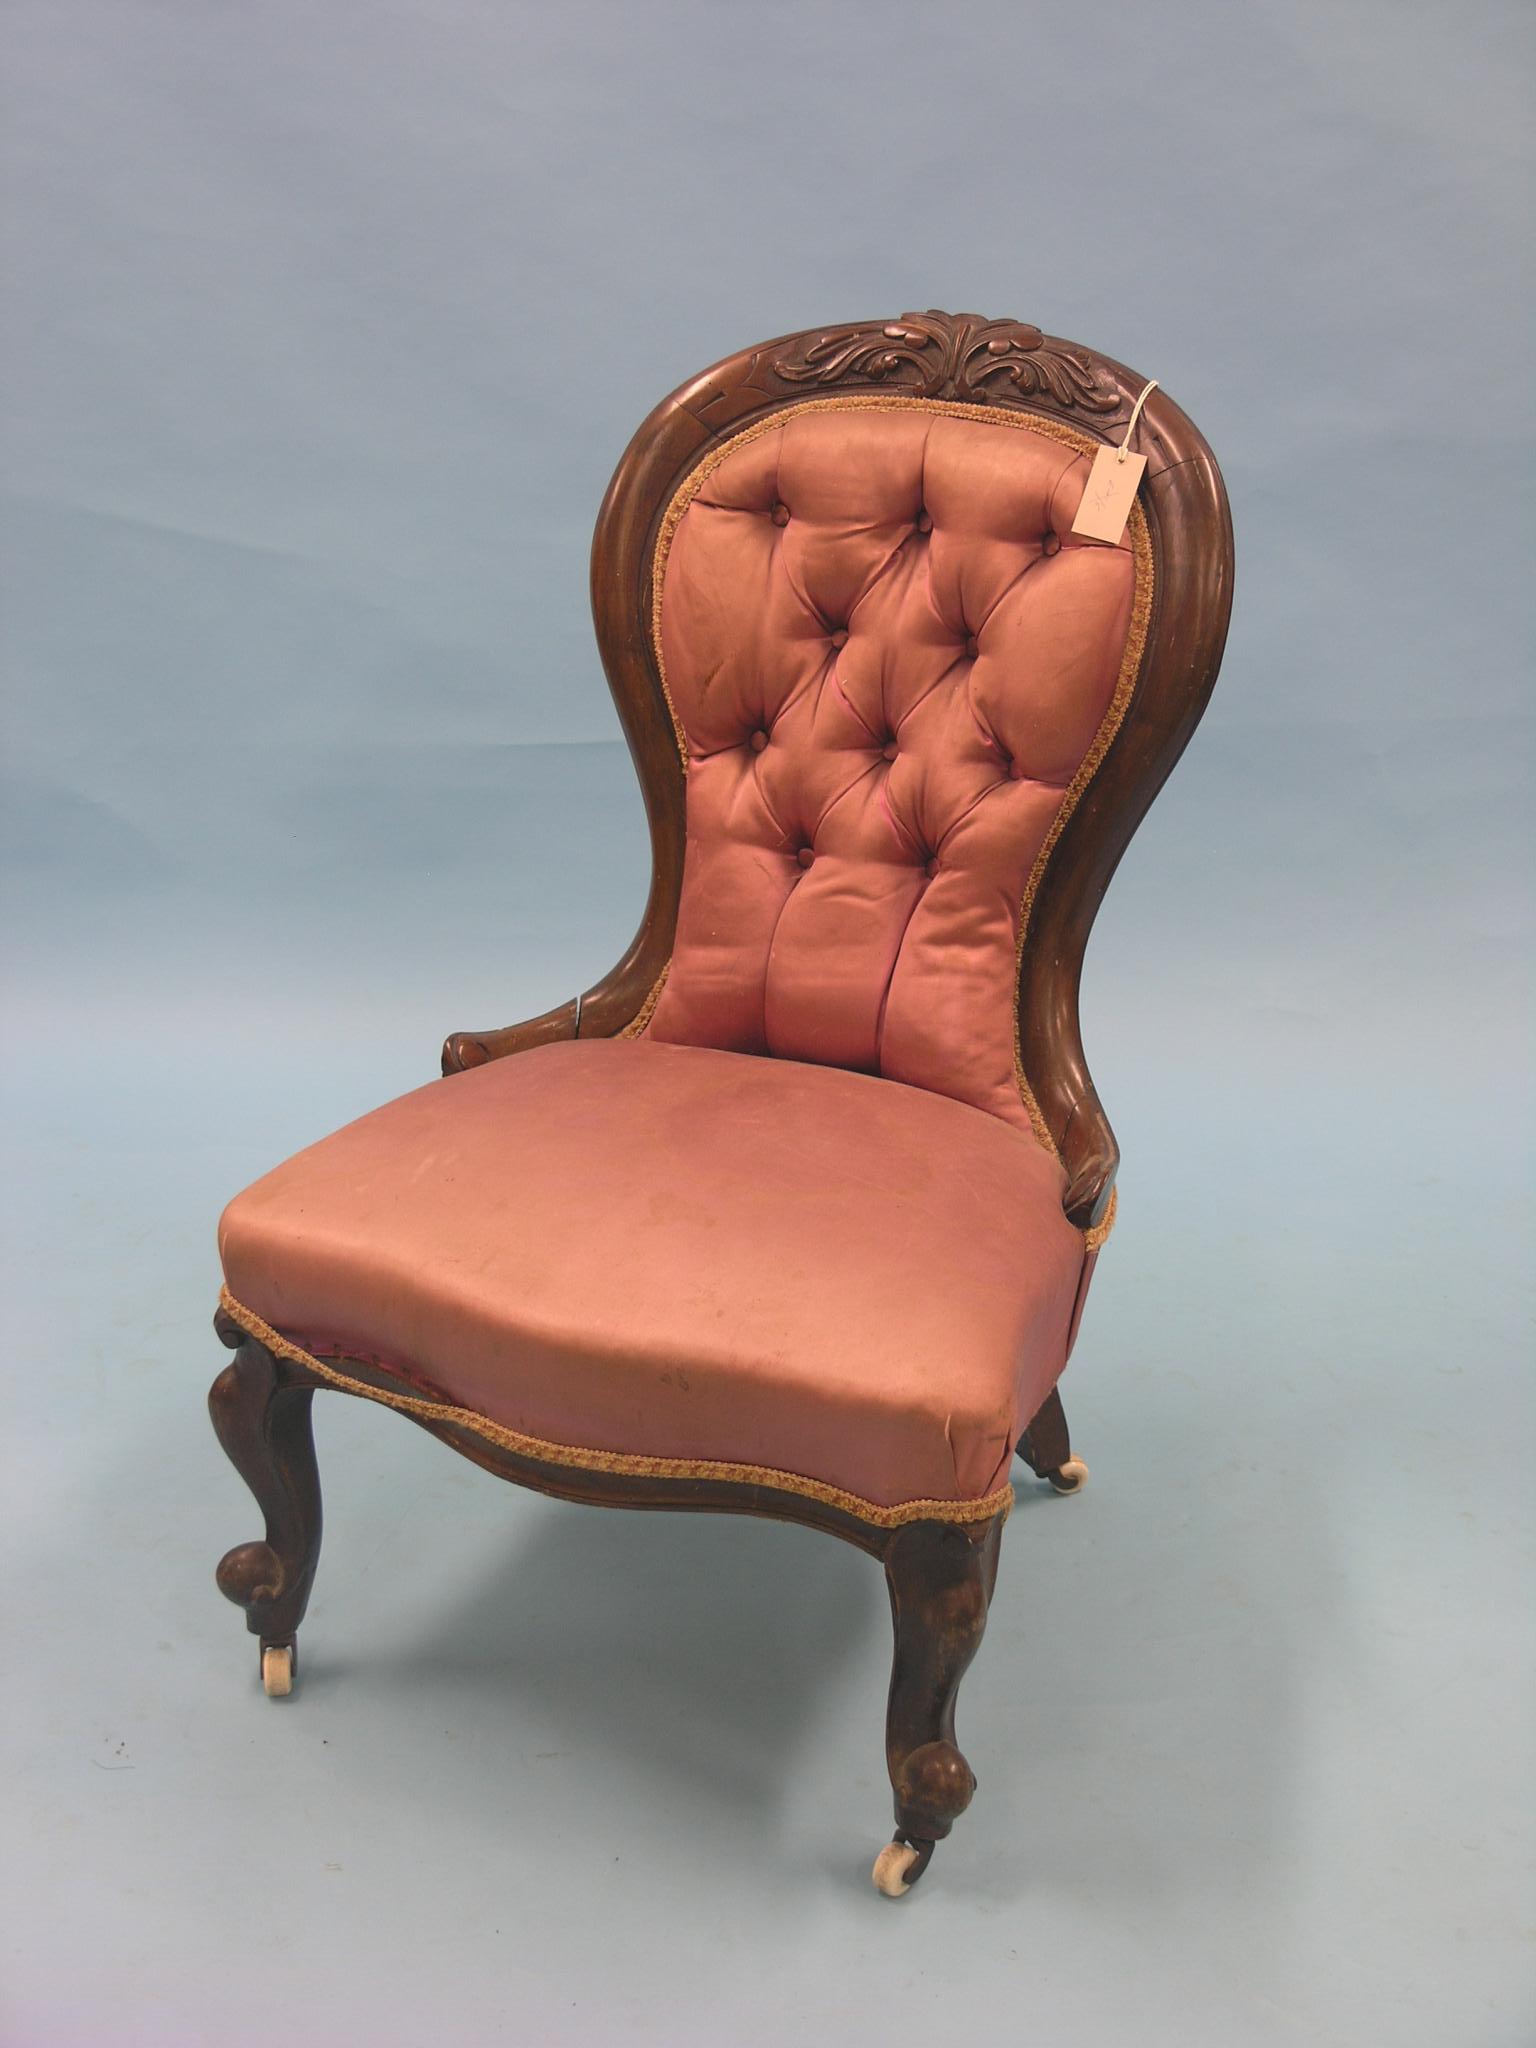 A Victorian mahogany-framed drawing room chair, spoon-back on cabriole legs with casters, upholstery